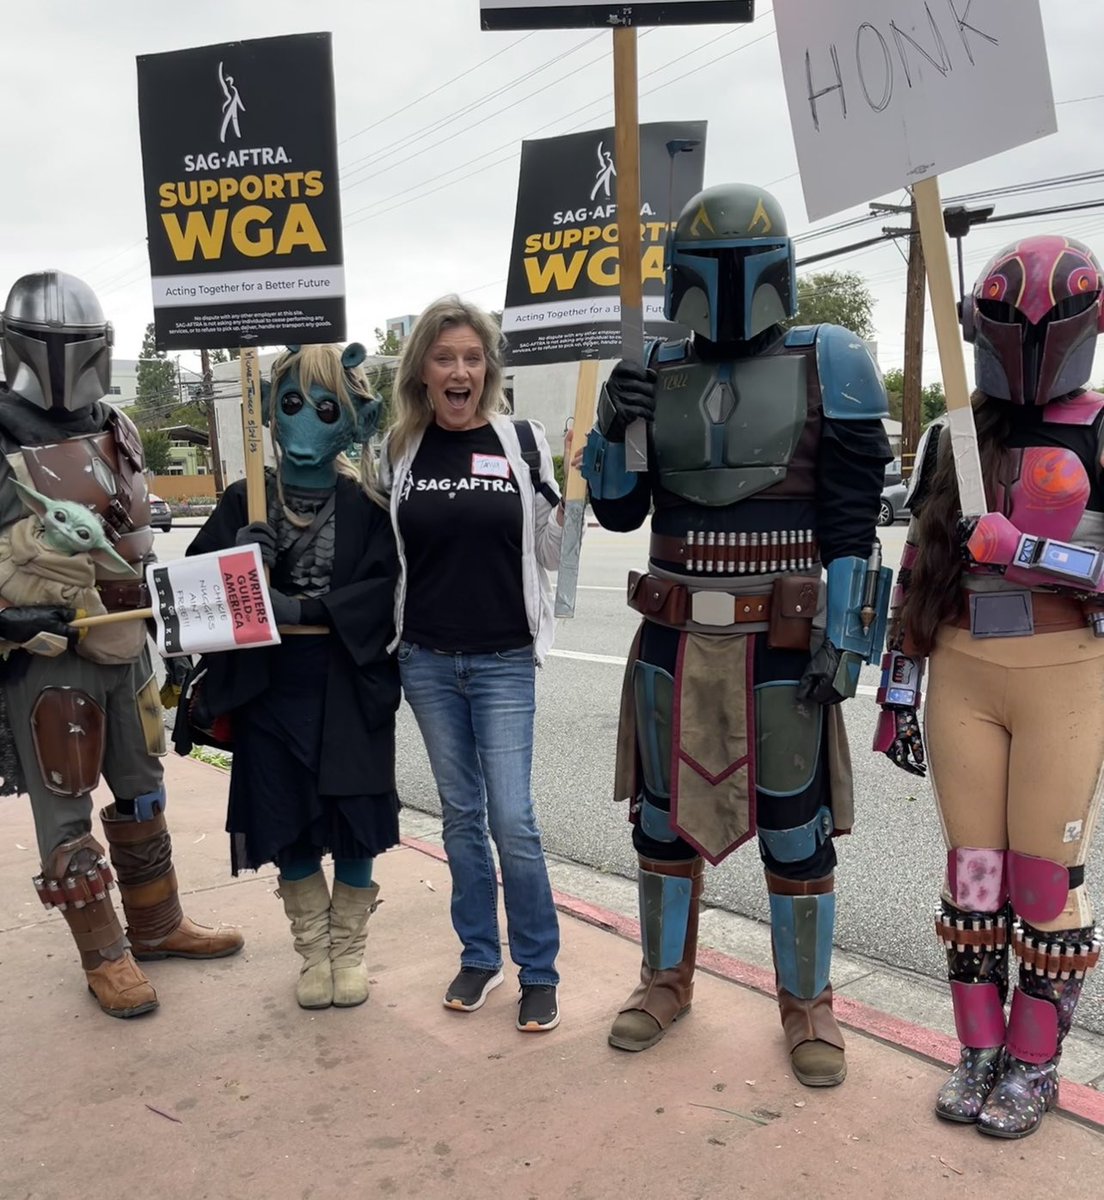 While on the picket line 🪧 as a @sagaftra member in solidarity 👊🏼with @WGAWest its awesome to make new friends! Both from earth 🌎 & other planets! 👽😁#picketpals #wgastrike #wga #wgastrong #SAGAFTRAstrong #sagaftra #solidarity #earth #Aliens #newfriends @heidiwillis #prewga